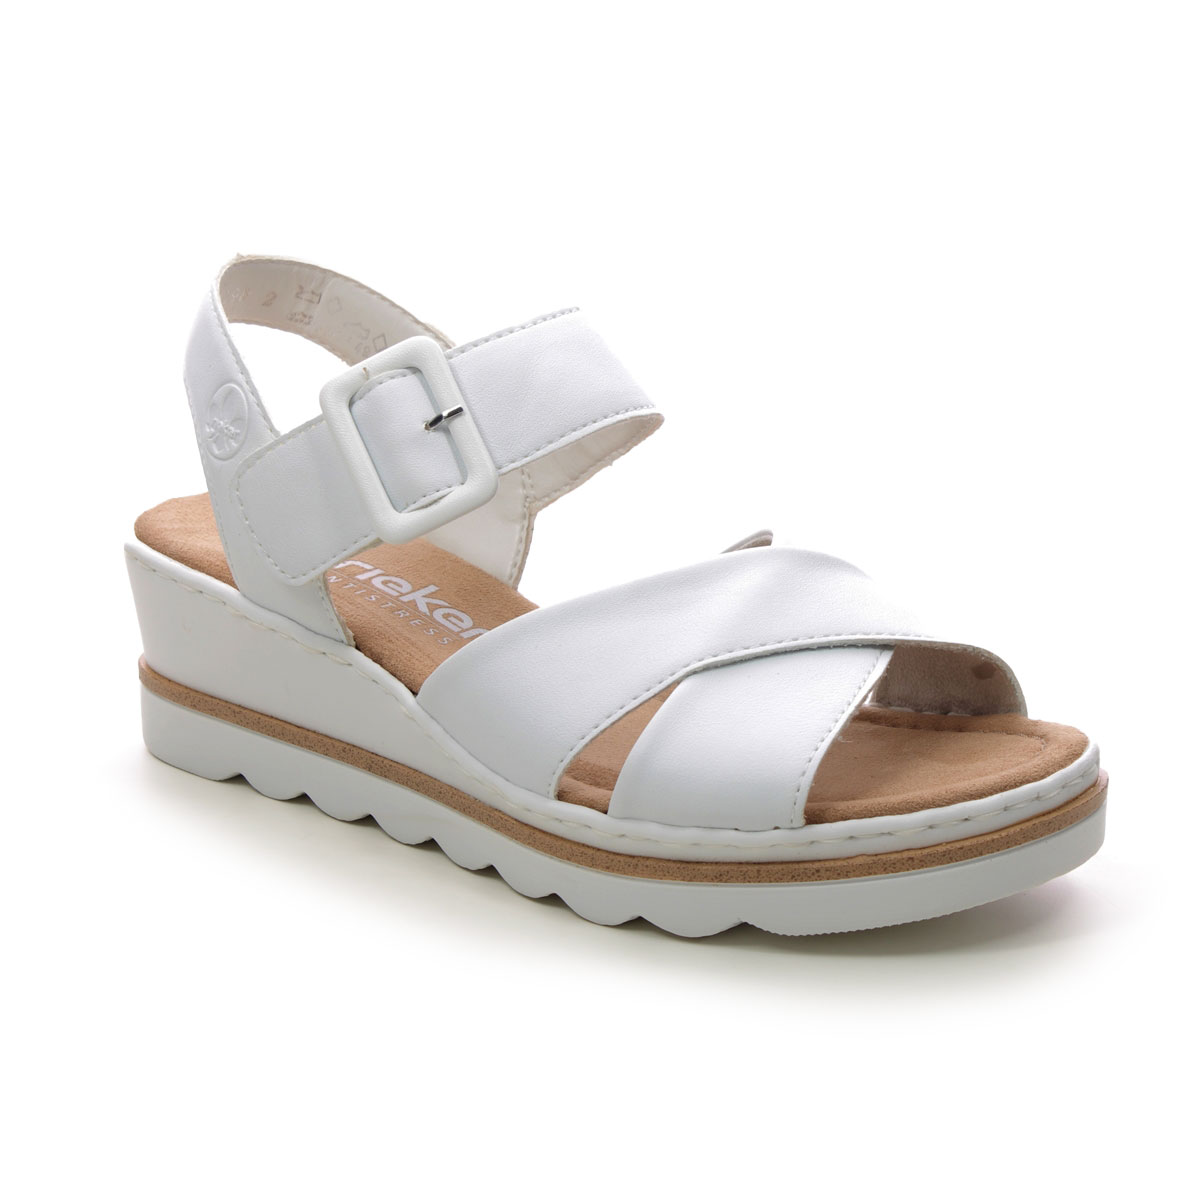 Rieker 67463-80 White Womens Wedge Sandals in a Plain Man-made in Size 41